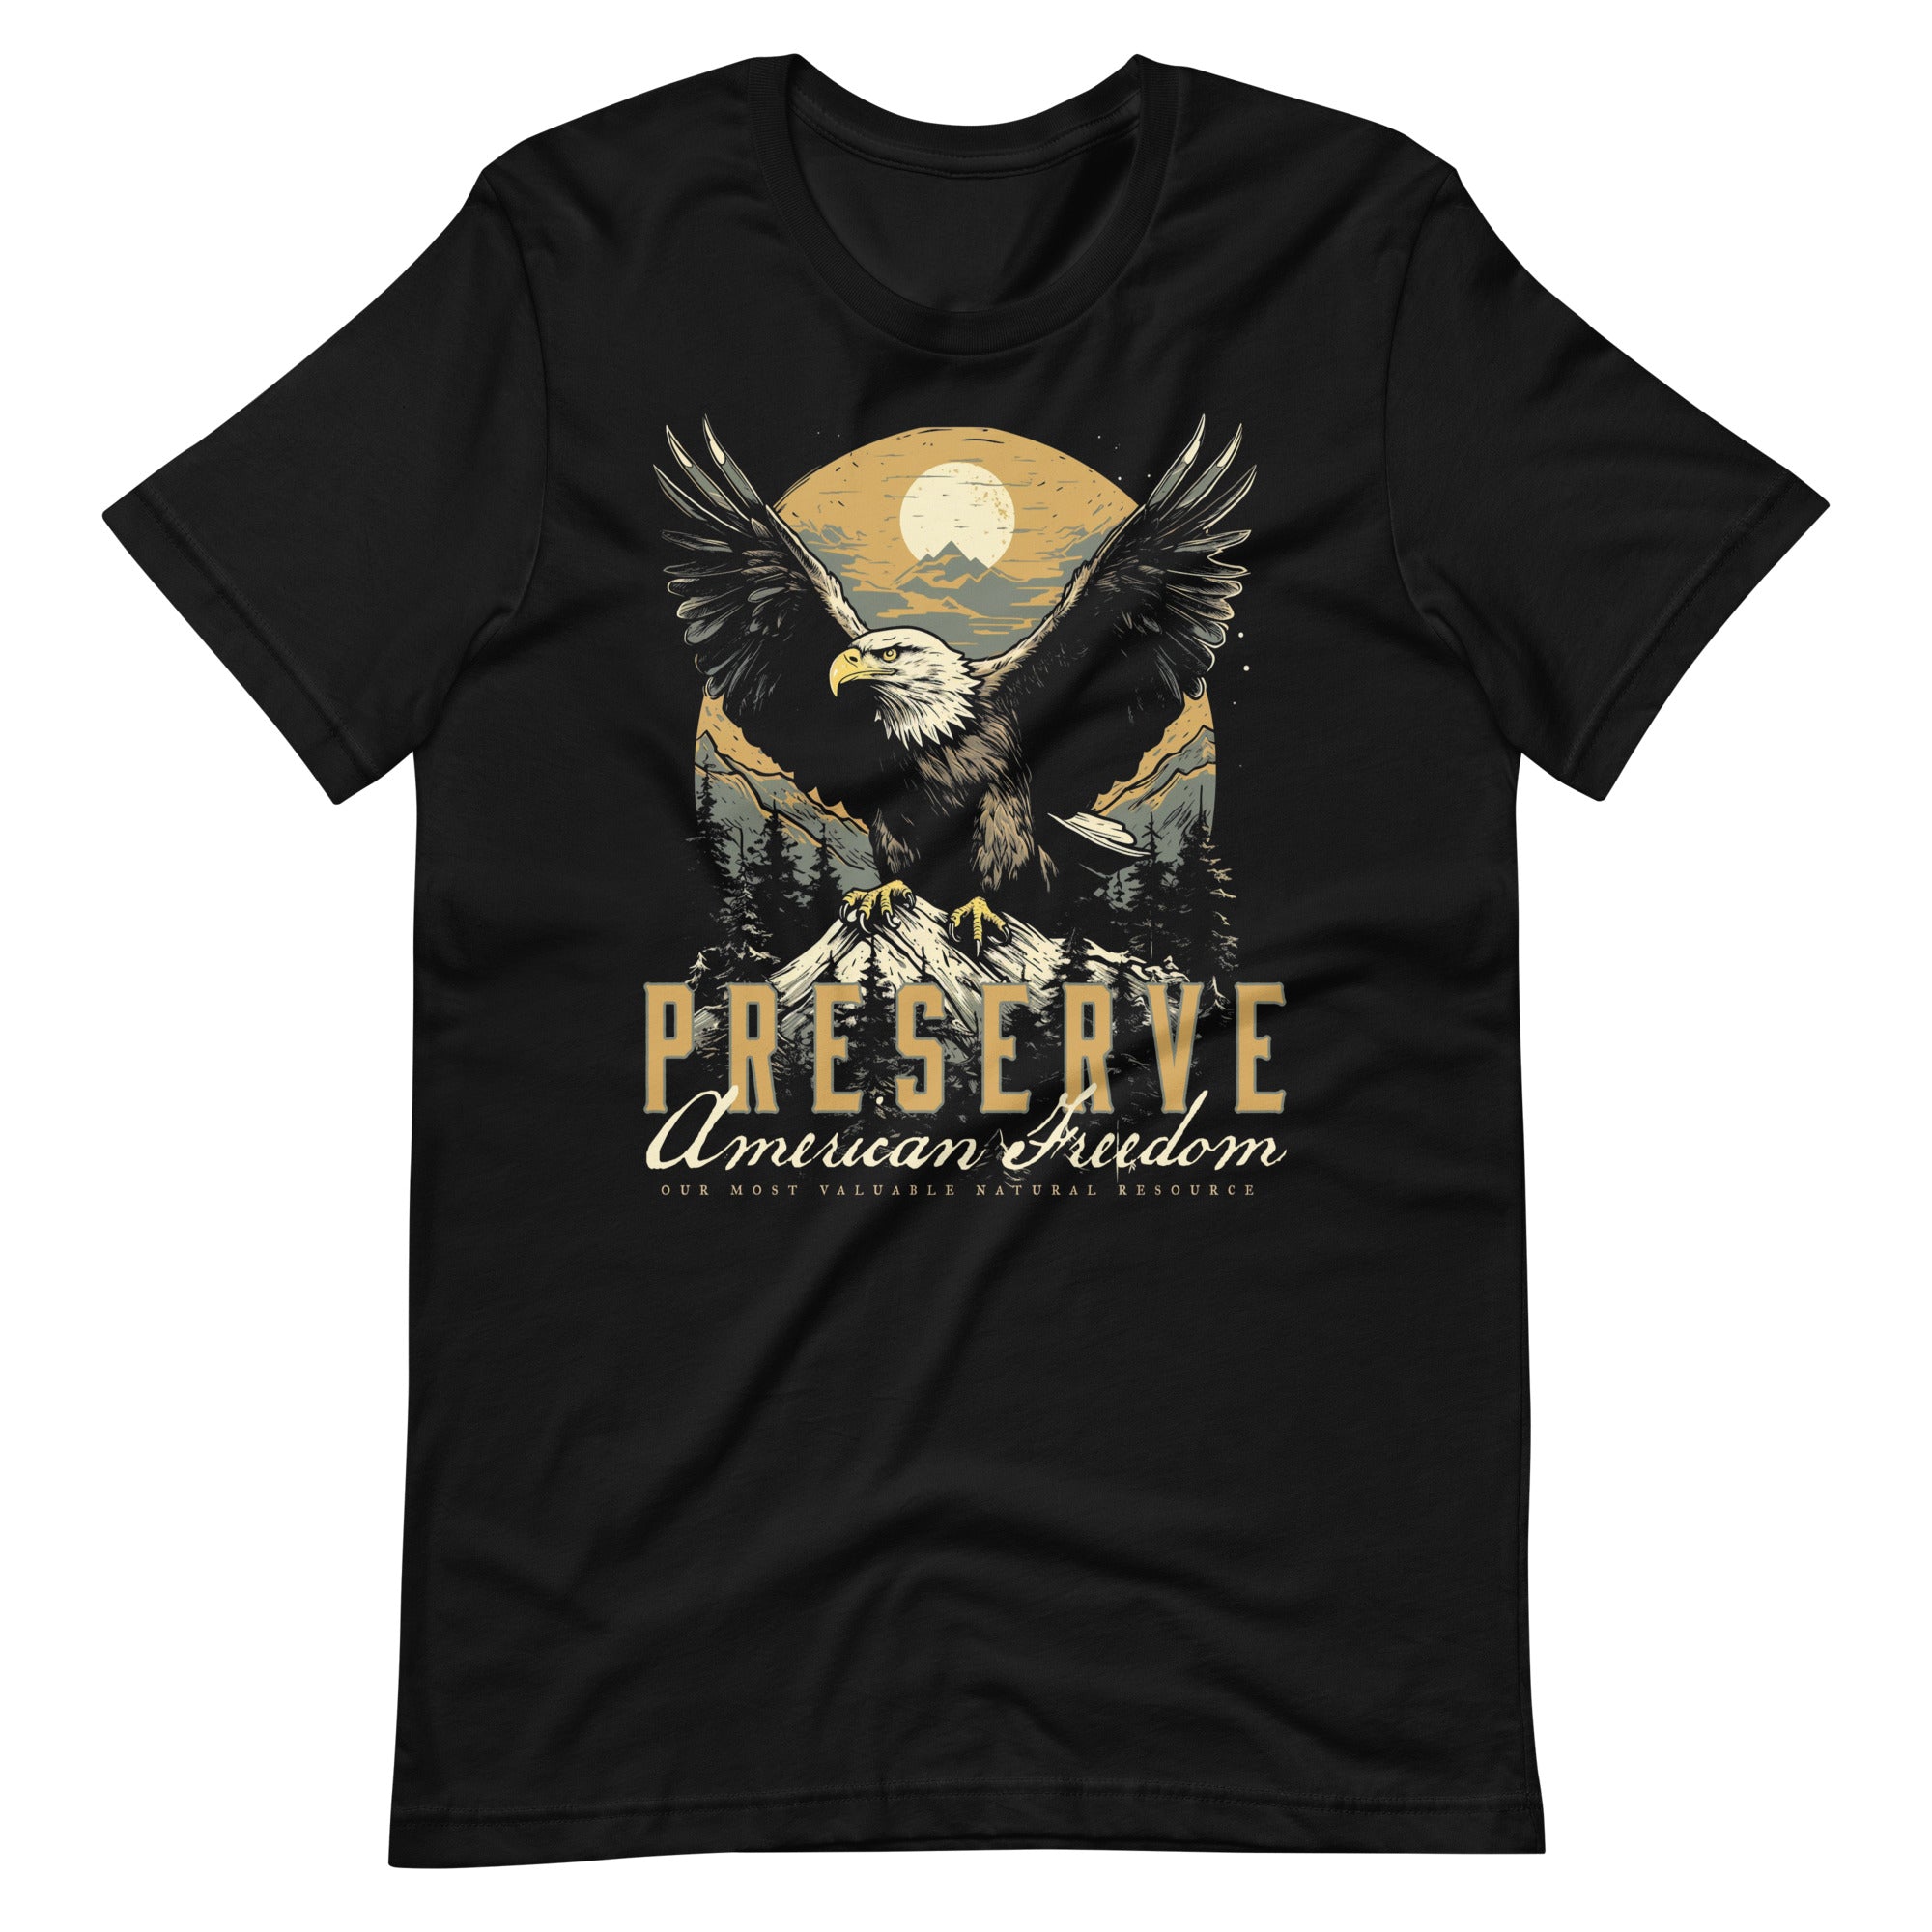 Preserve American Freedom Graphic T-Shirt